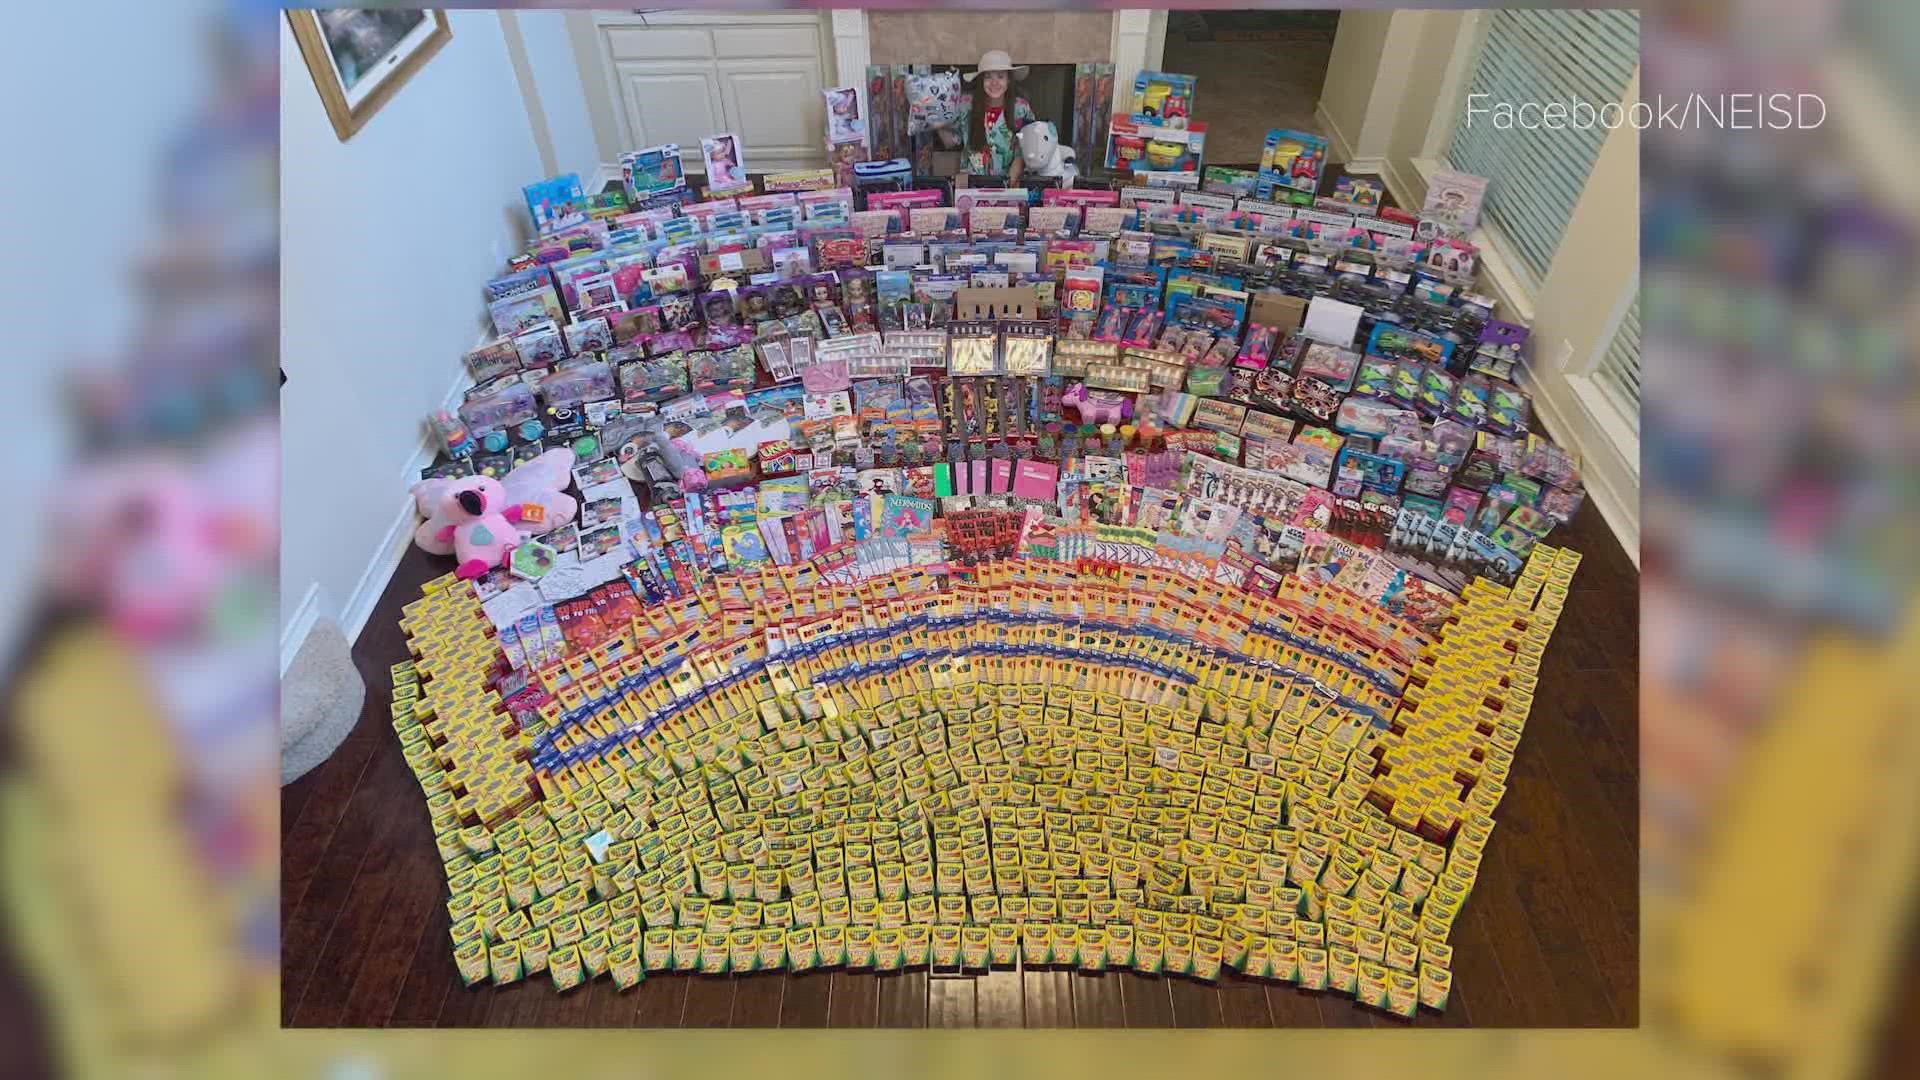 Jordyn, who lives in San Antonio, has made her massive donation efforts an annual birthday tradition.